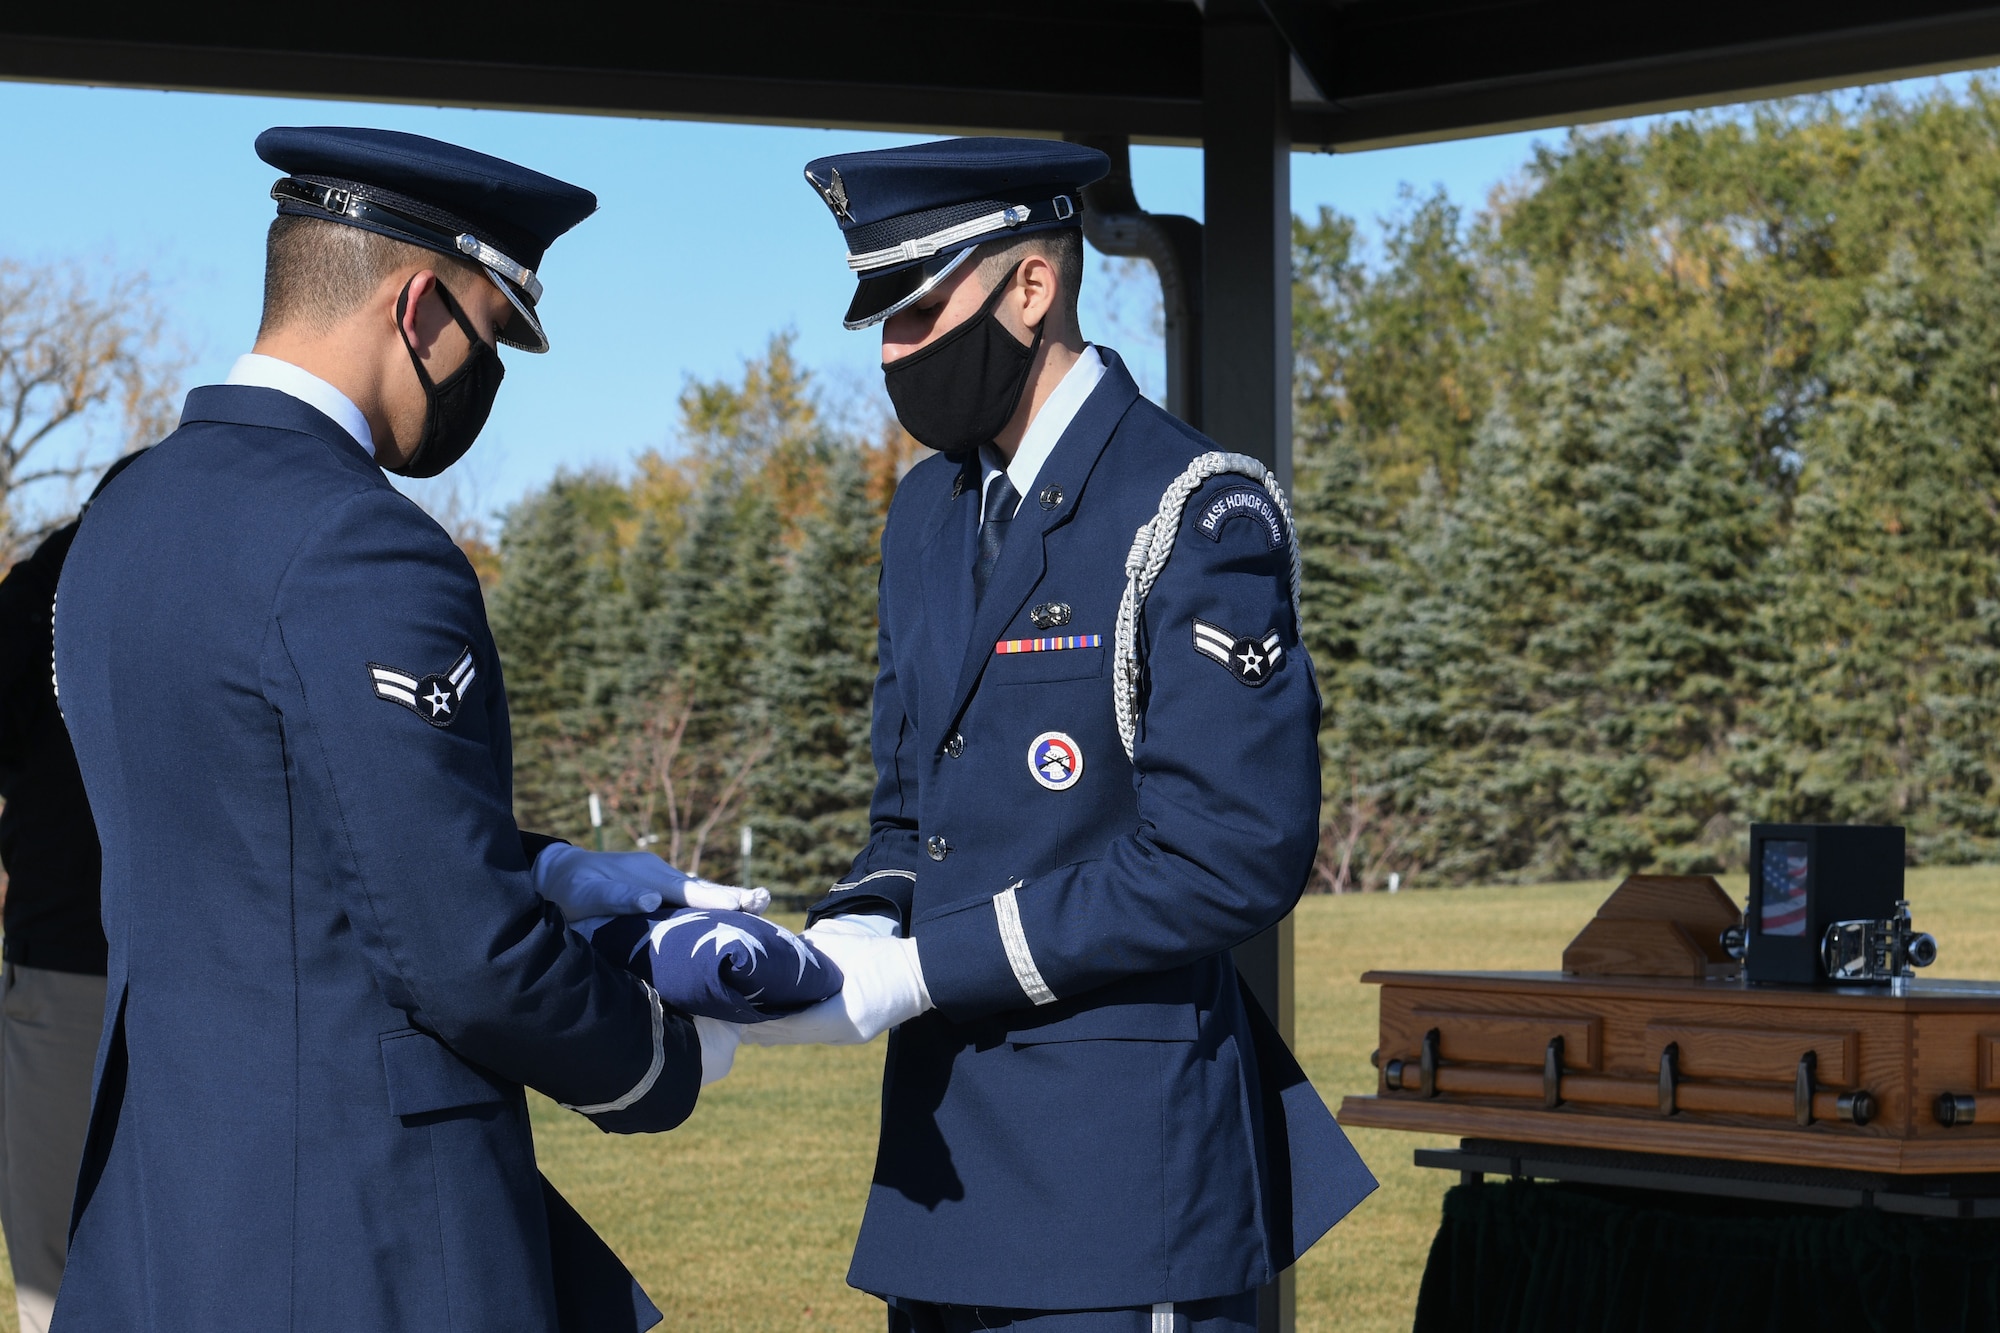 Two honor guardsmen from Grand Forks Air Force Base fold the flag during a funeral service for an unclaimed veteran Oct. 16, 2020 at the Fargo National Cemetary, N.D. Lelan Arthur Derr, Iowa native, and United Stated Air Force veteran who served in the Vietnam War era between 1971 and 1975, died December 10, 2019. (U.S. Air Force photo by Airman Ashley Richards)